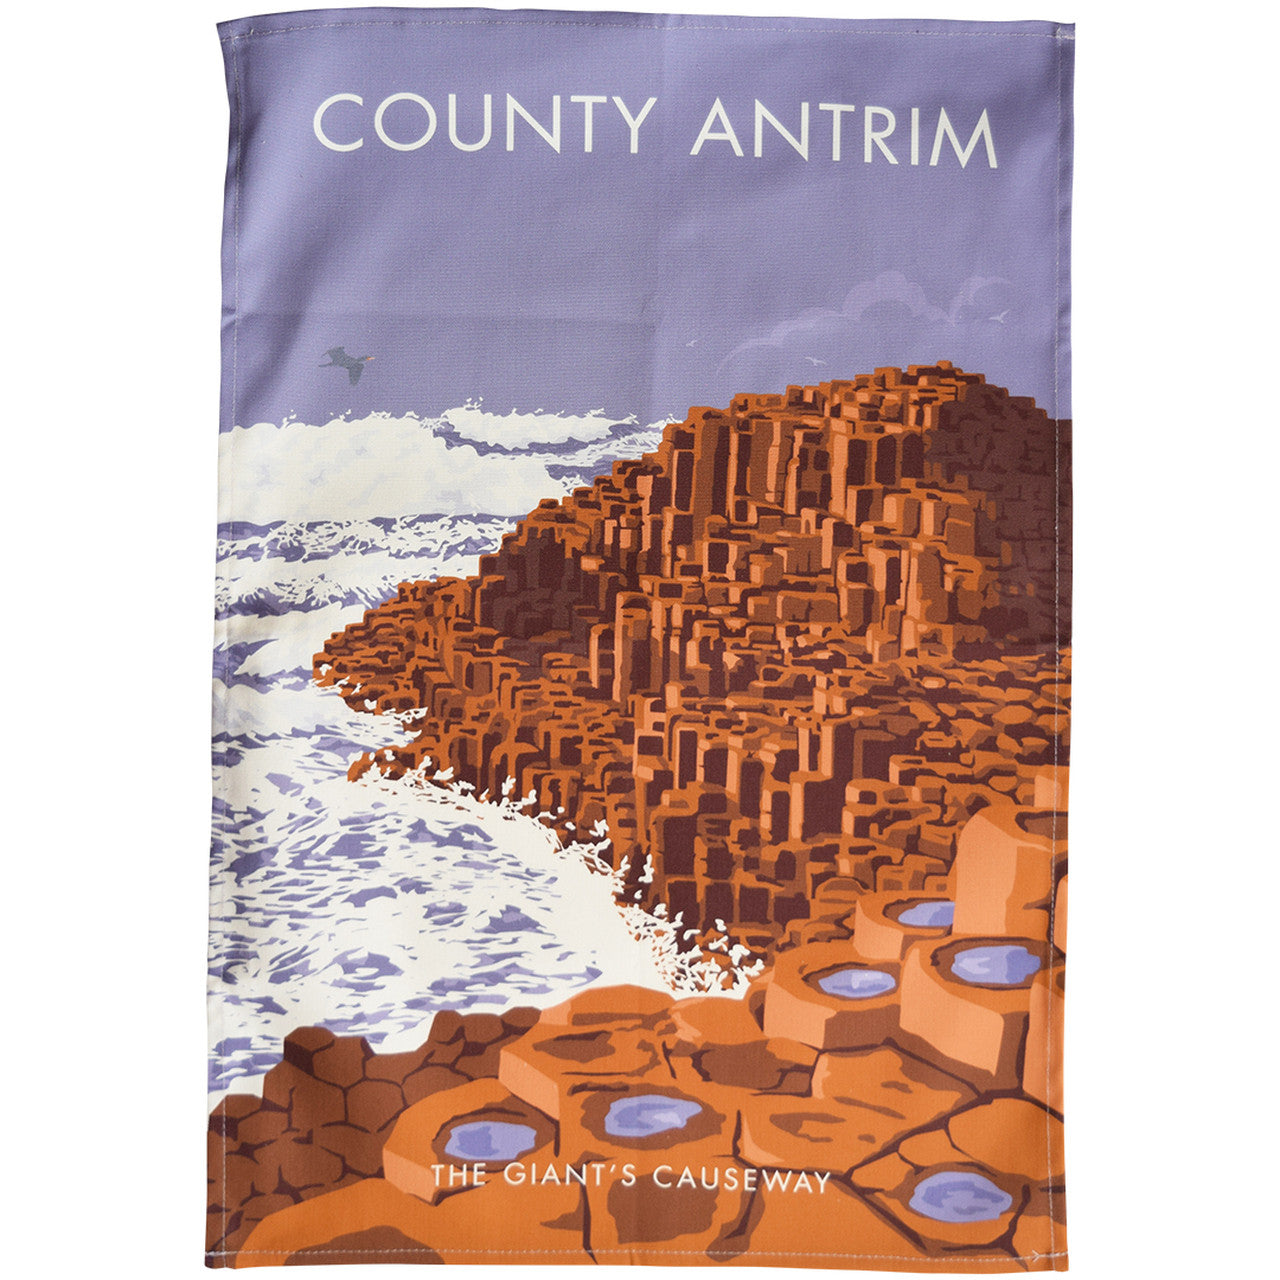 County Antrim Tea Towel by Town Towels